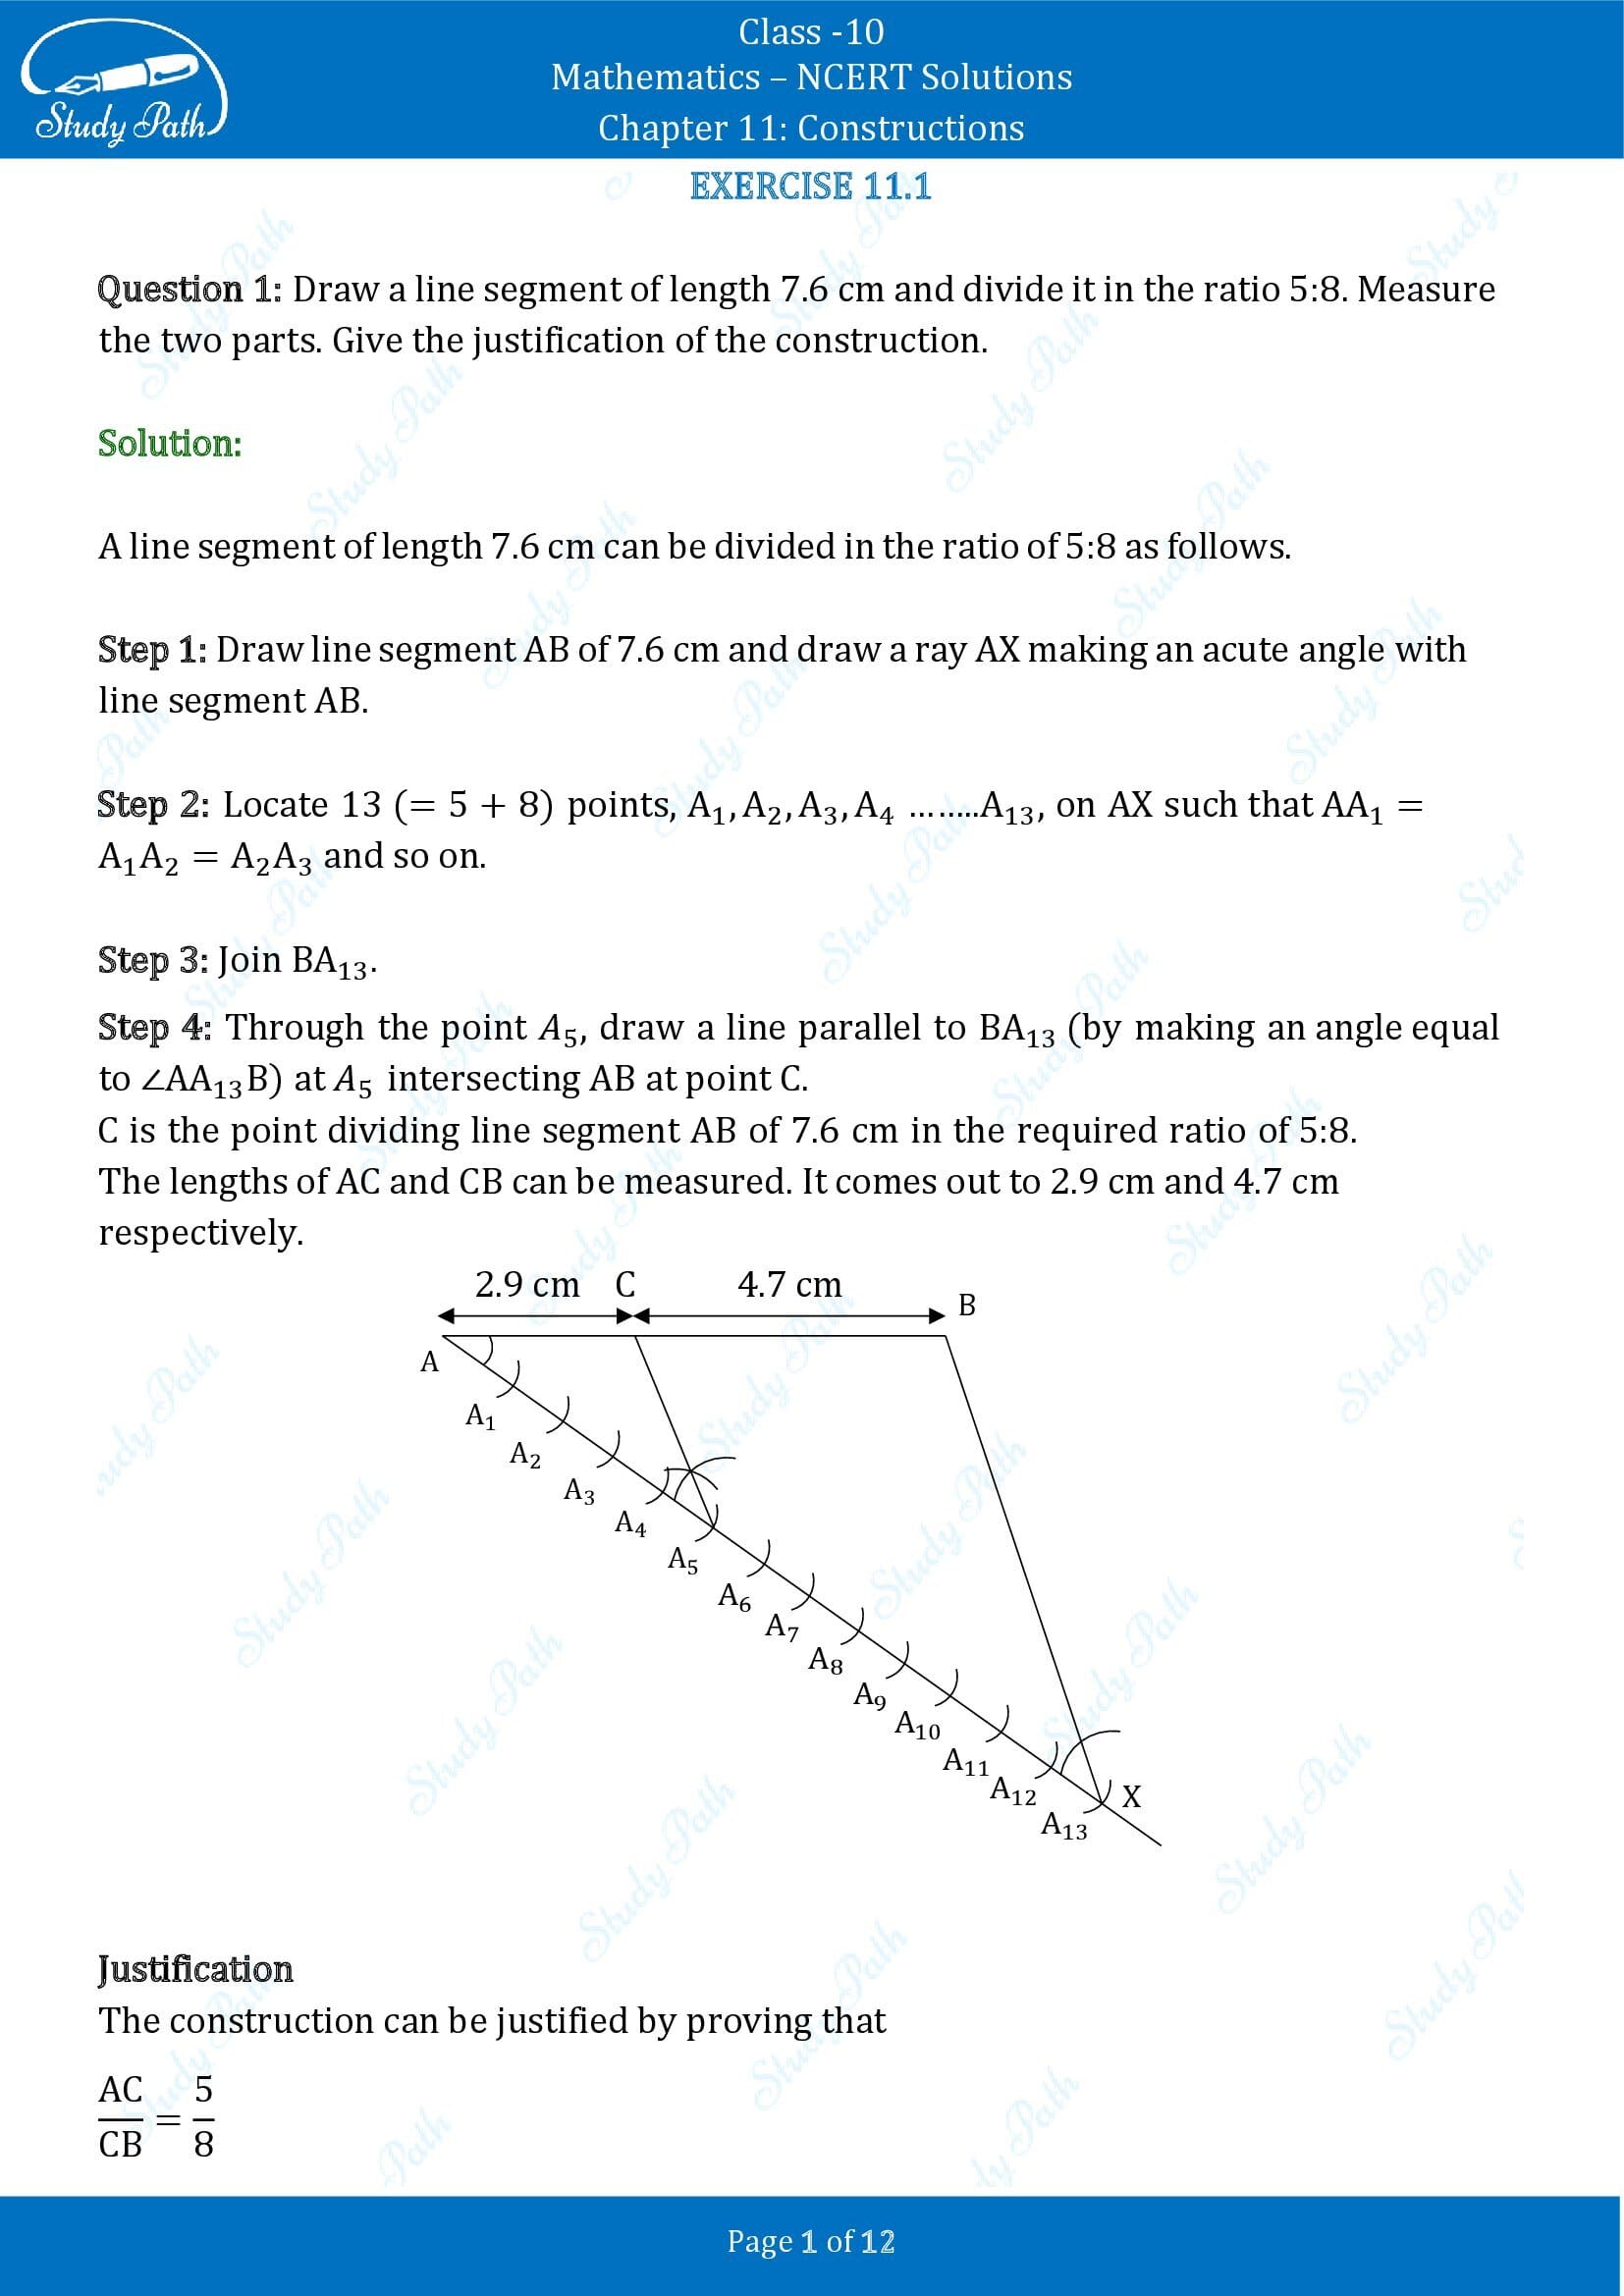 NCERT Solutions for Class 10 Maths Chapter 11 Constructions Exercise 11.1 00001